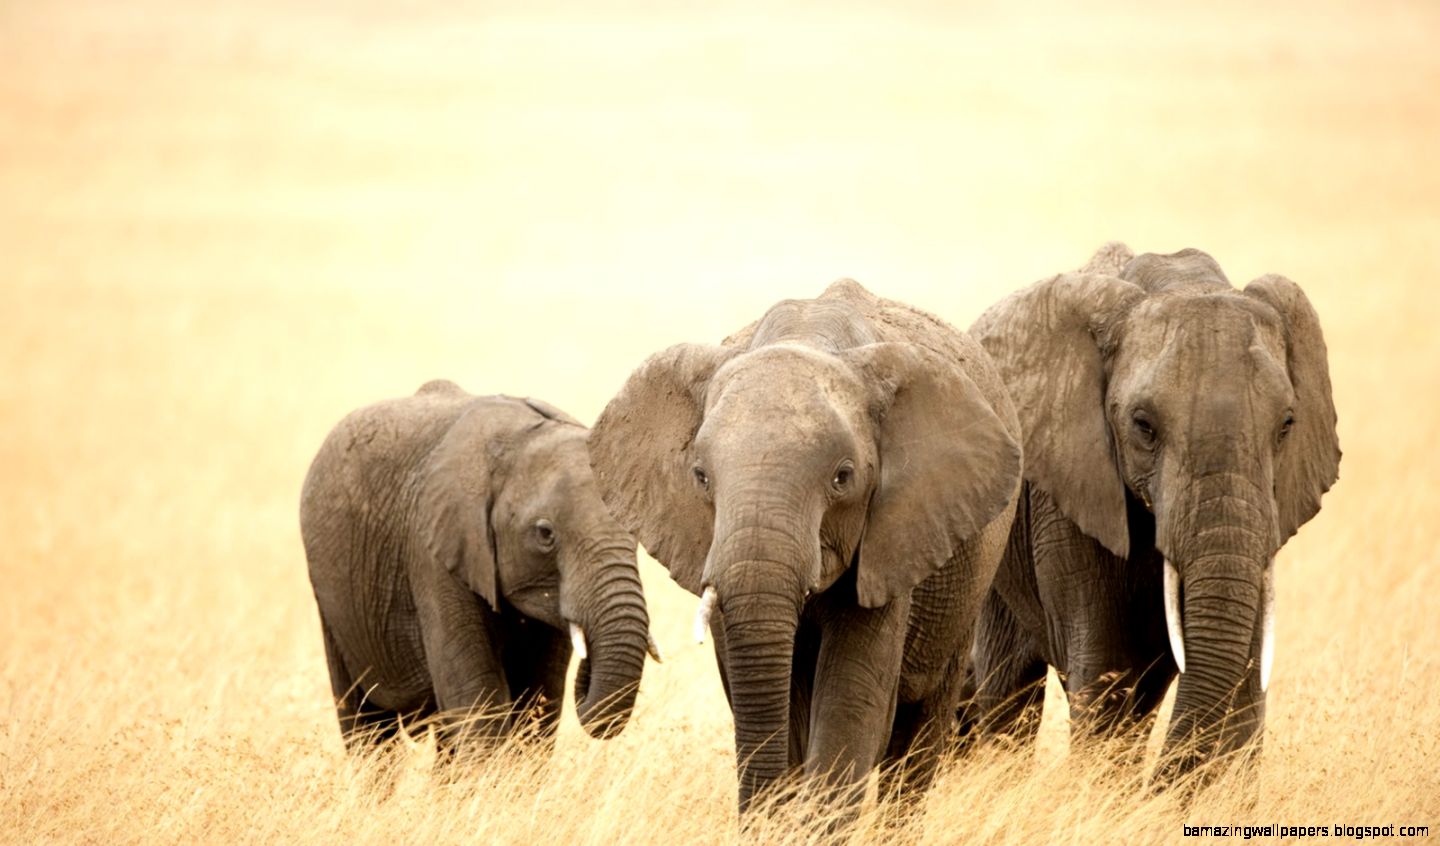 Cute Elephant Pictures Hd - Elephants Are The Only Animal That Can T Jump - HD Wallpaper 